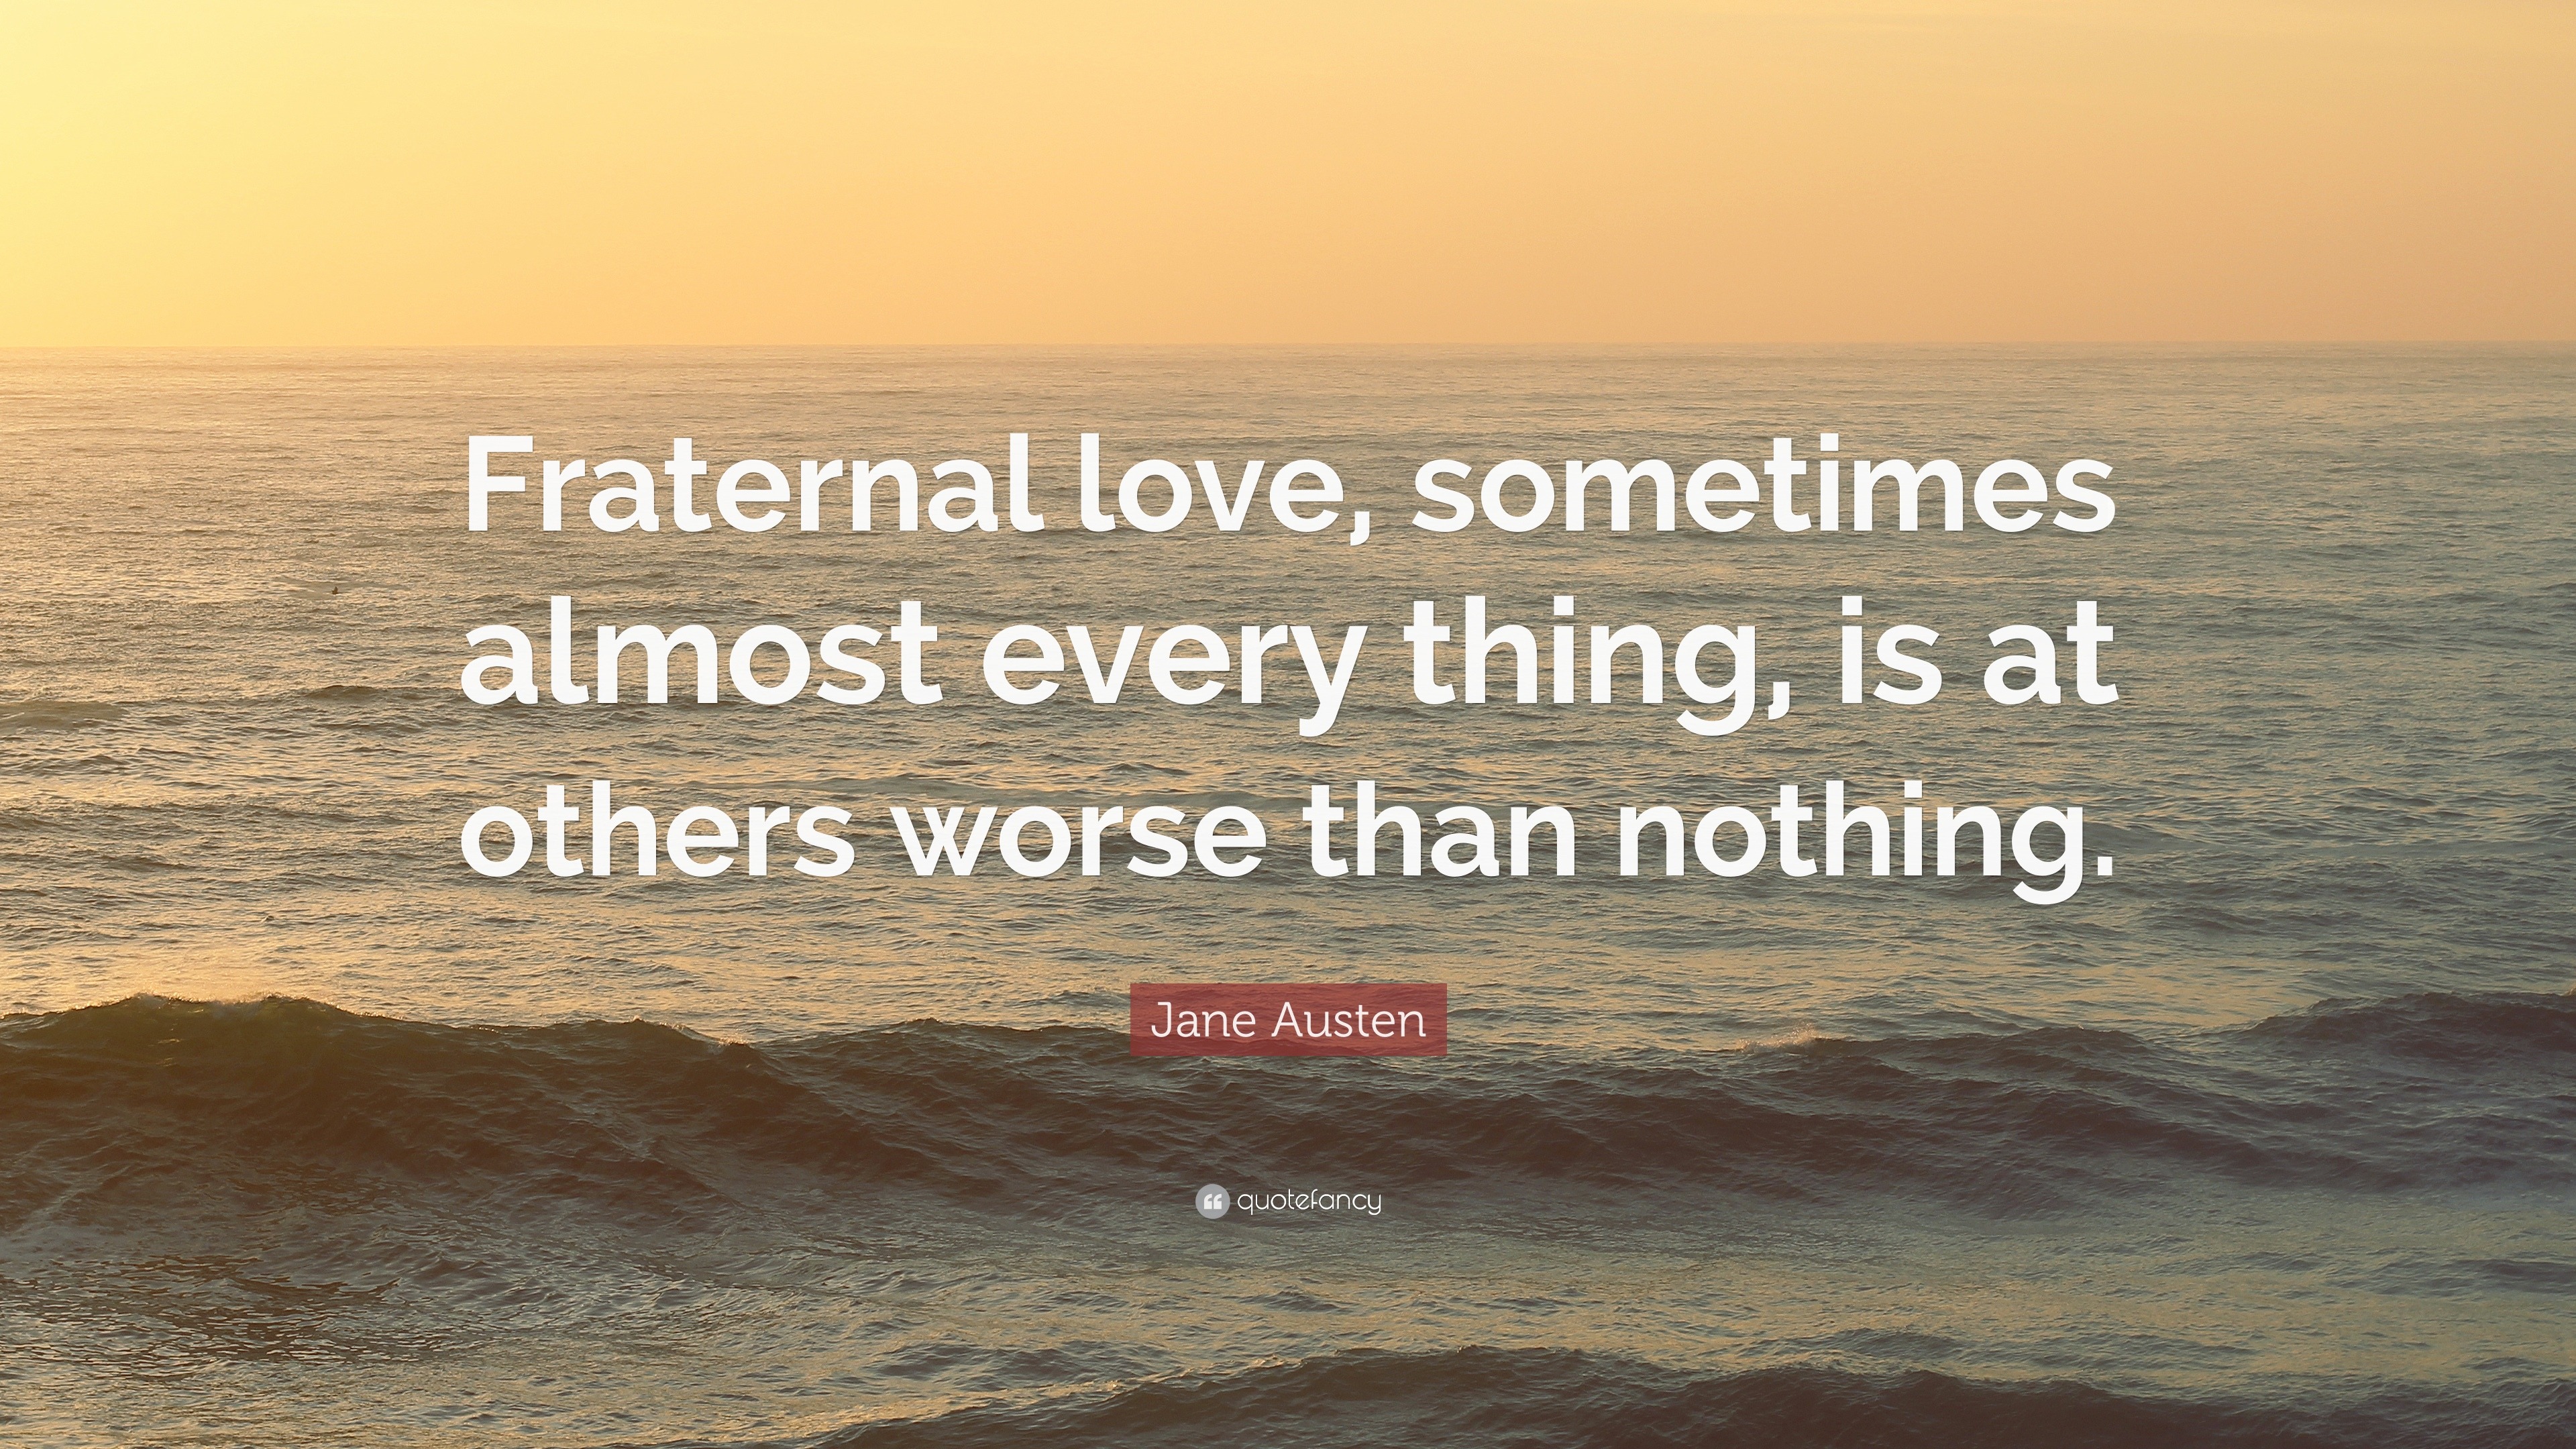 Jane Austen Quote “Fraternal love, sometimes almost every thing, is at